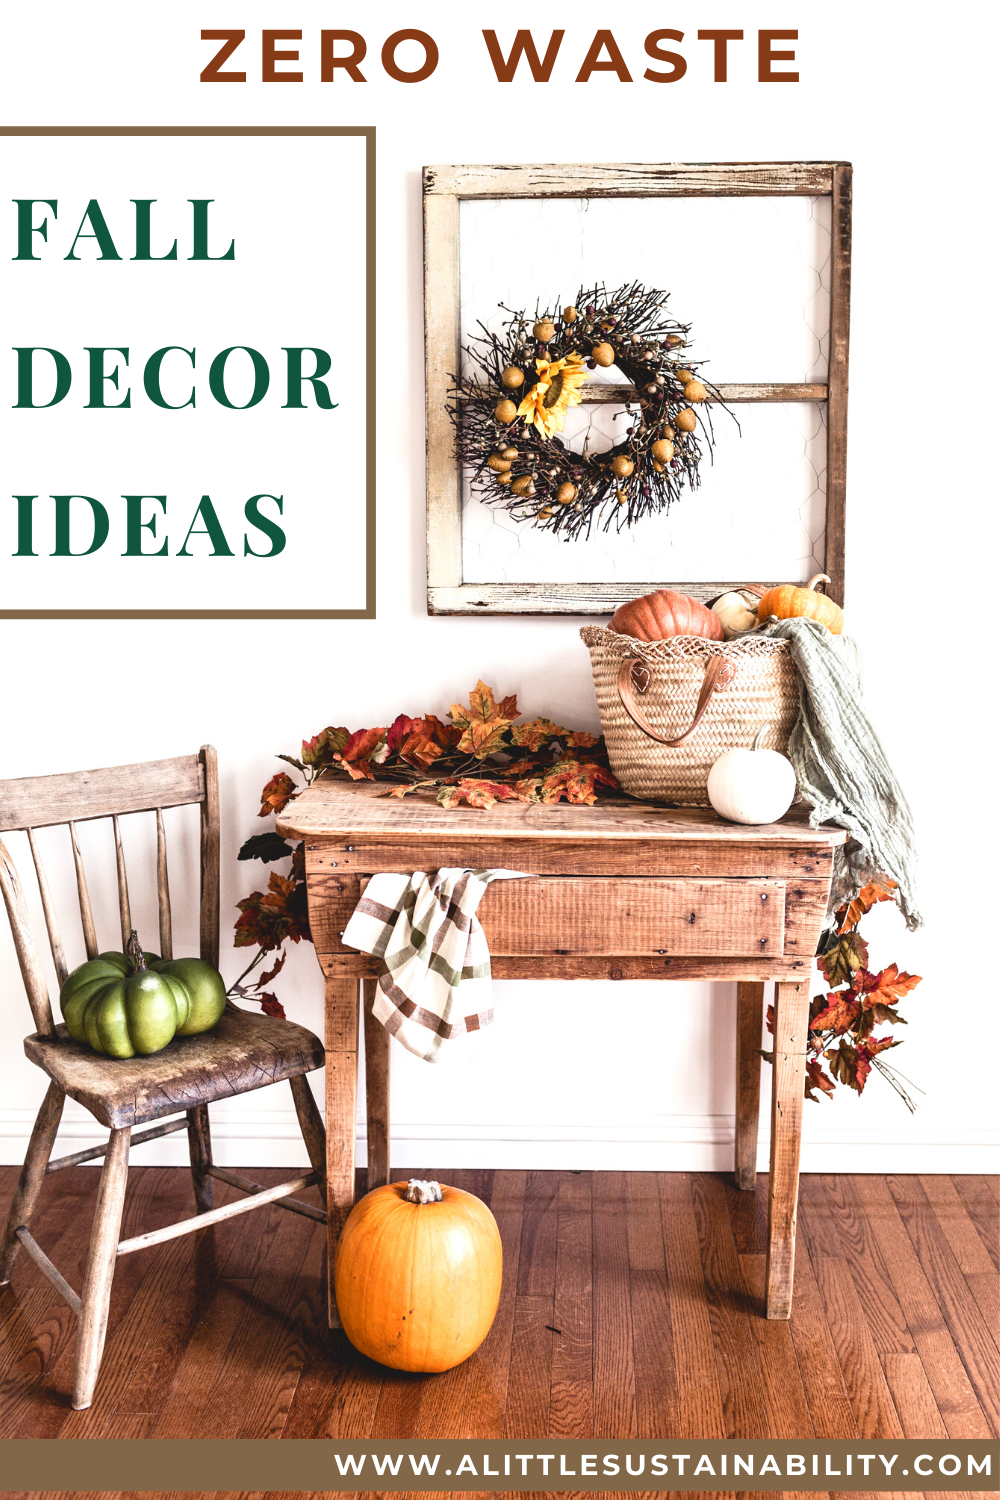 The perfect fall decor for the home that is zero waste and sustainable. Have an eco-friendly Fall including Halloween and Thanksgiving with these great ideas and tips for finding the right zero waste decorations for your home and porch. Learn more at www.alittlesustainablitity.com